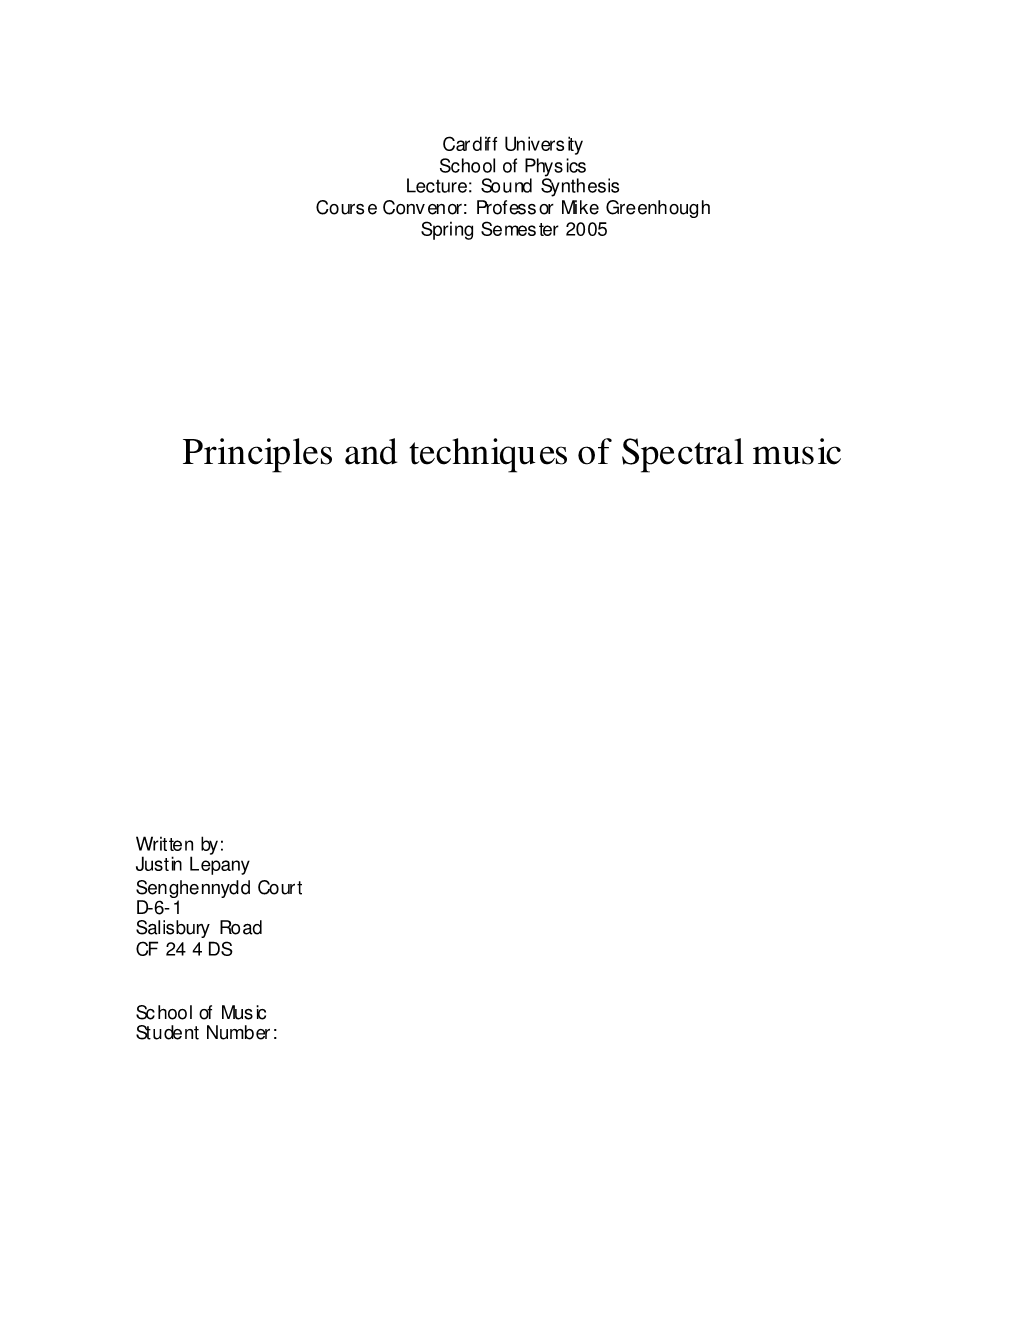 Principles and Techniques of Spectral Music